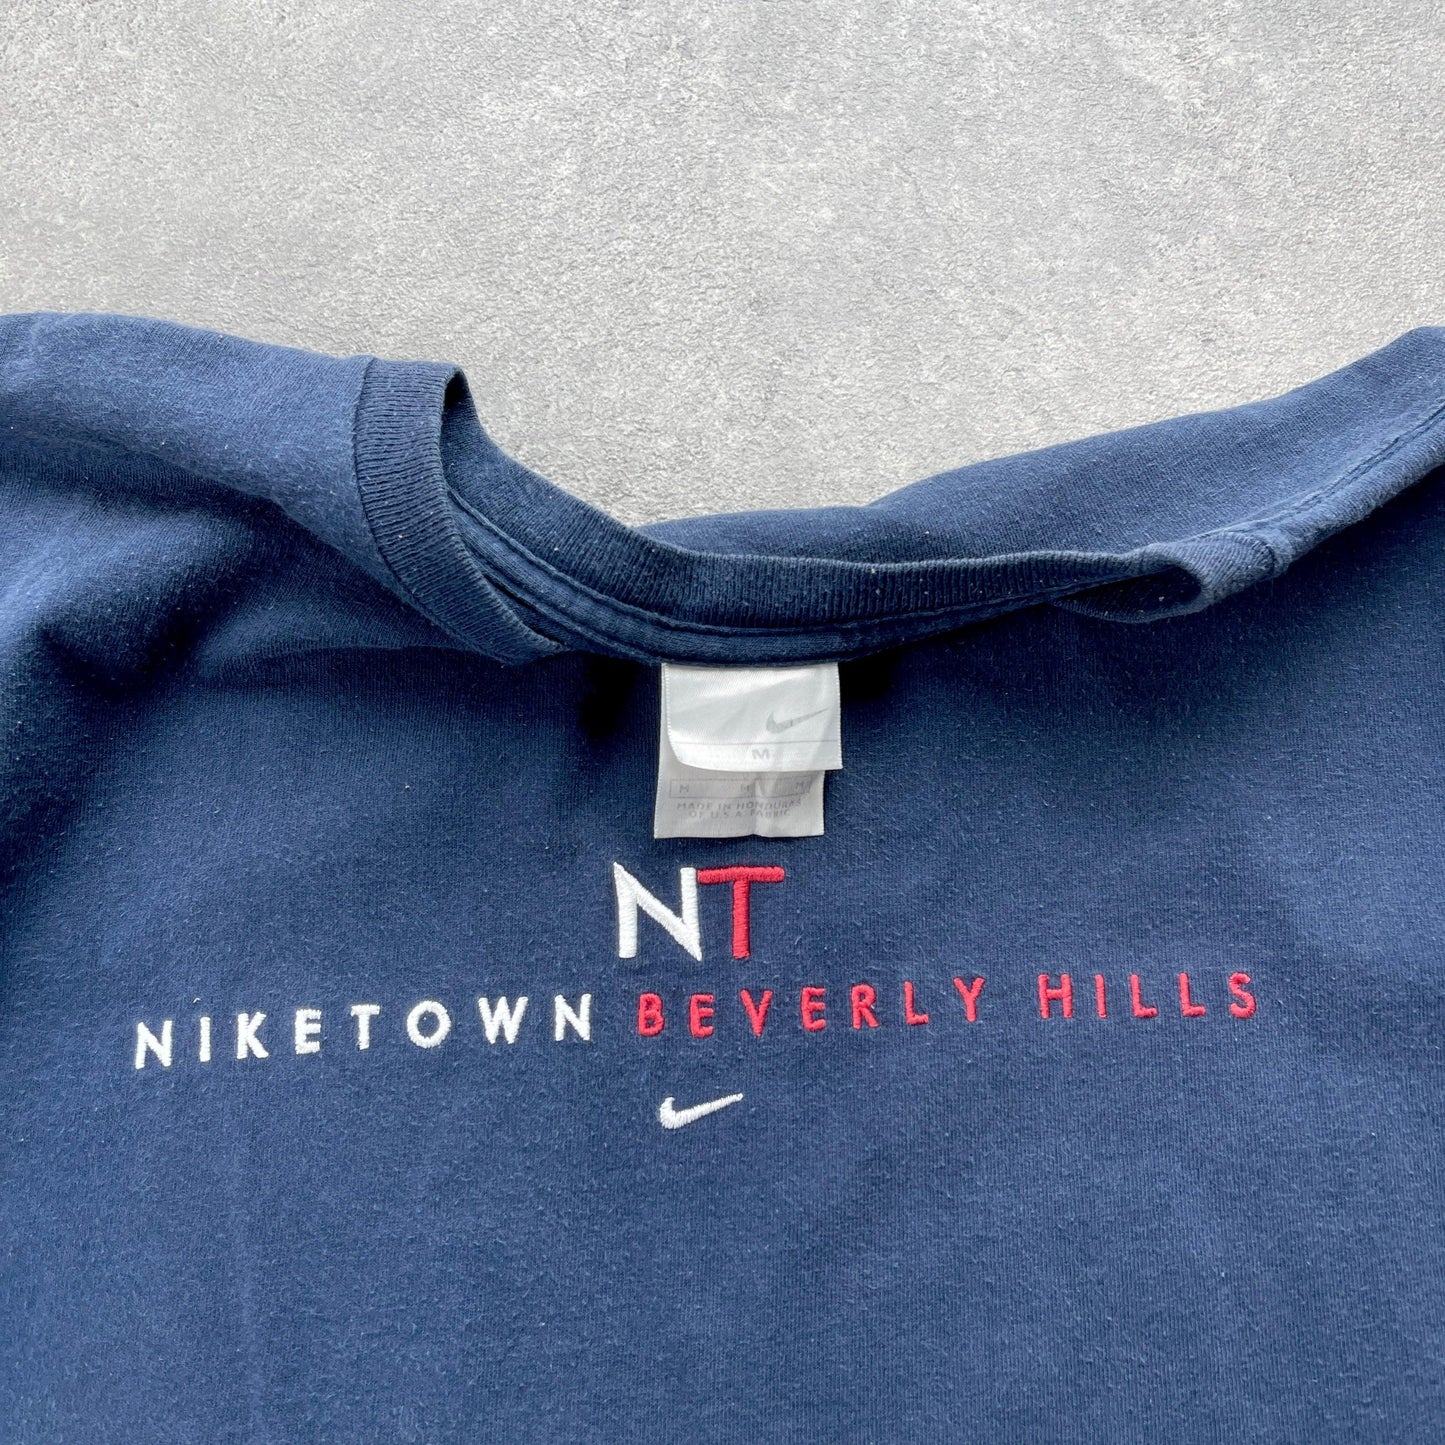 Nike Town Beverly Hills RARE 1990s heavyweight embroidered t-shirt (M) - Known Source